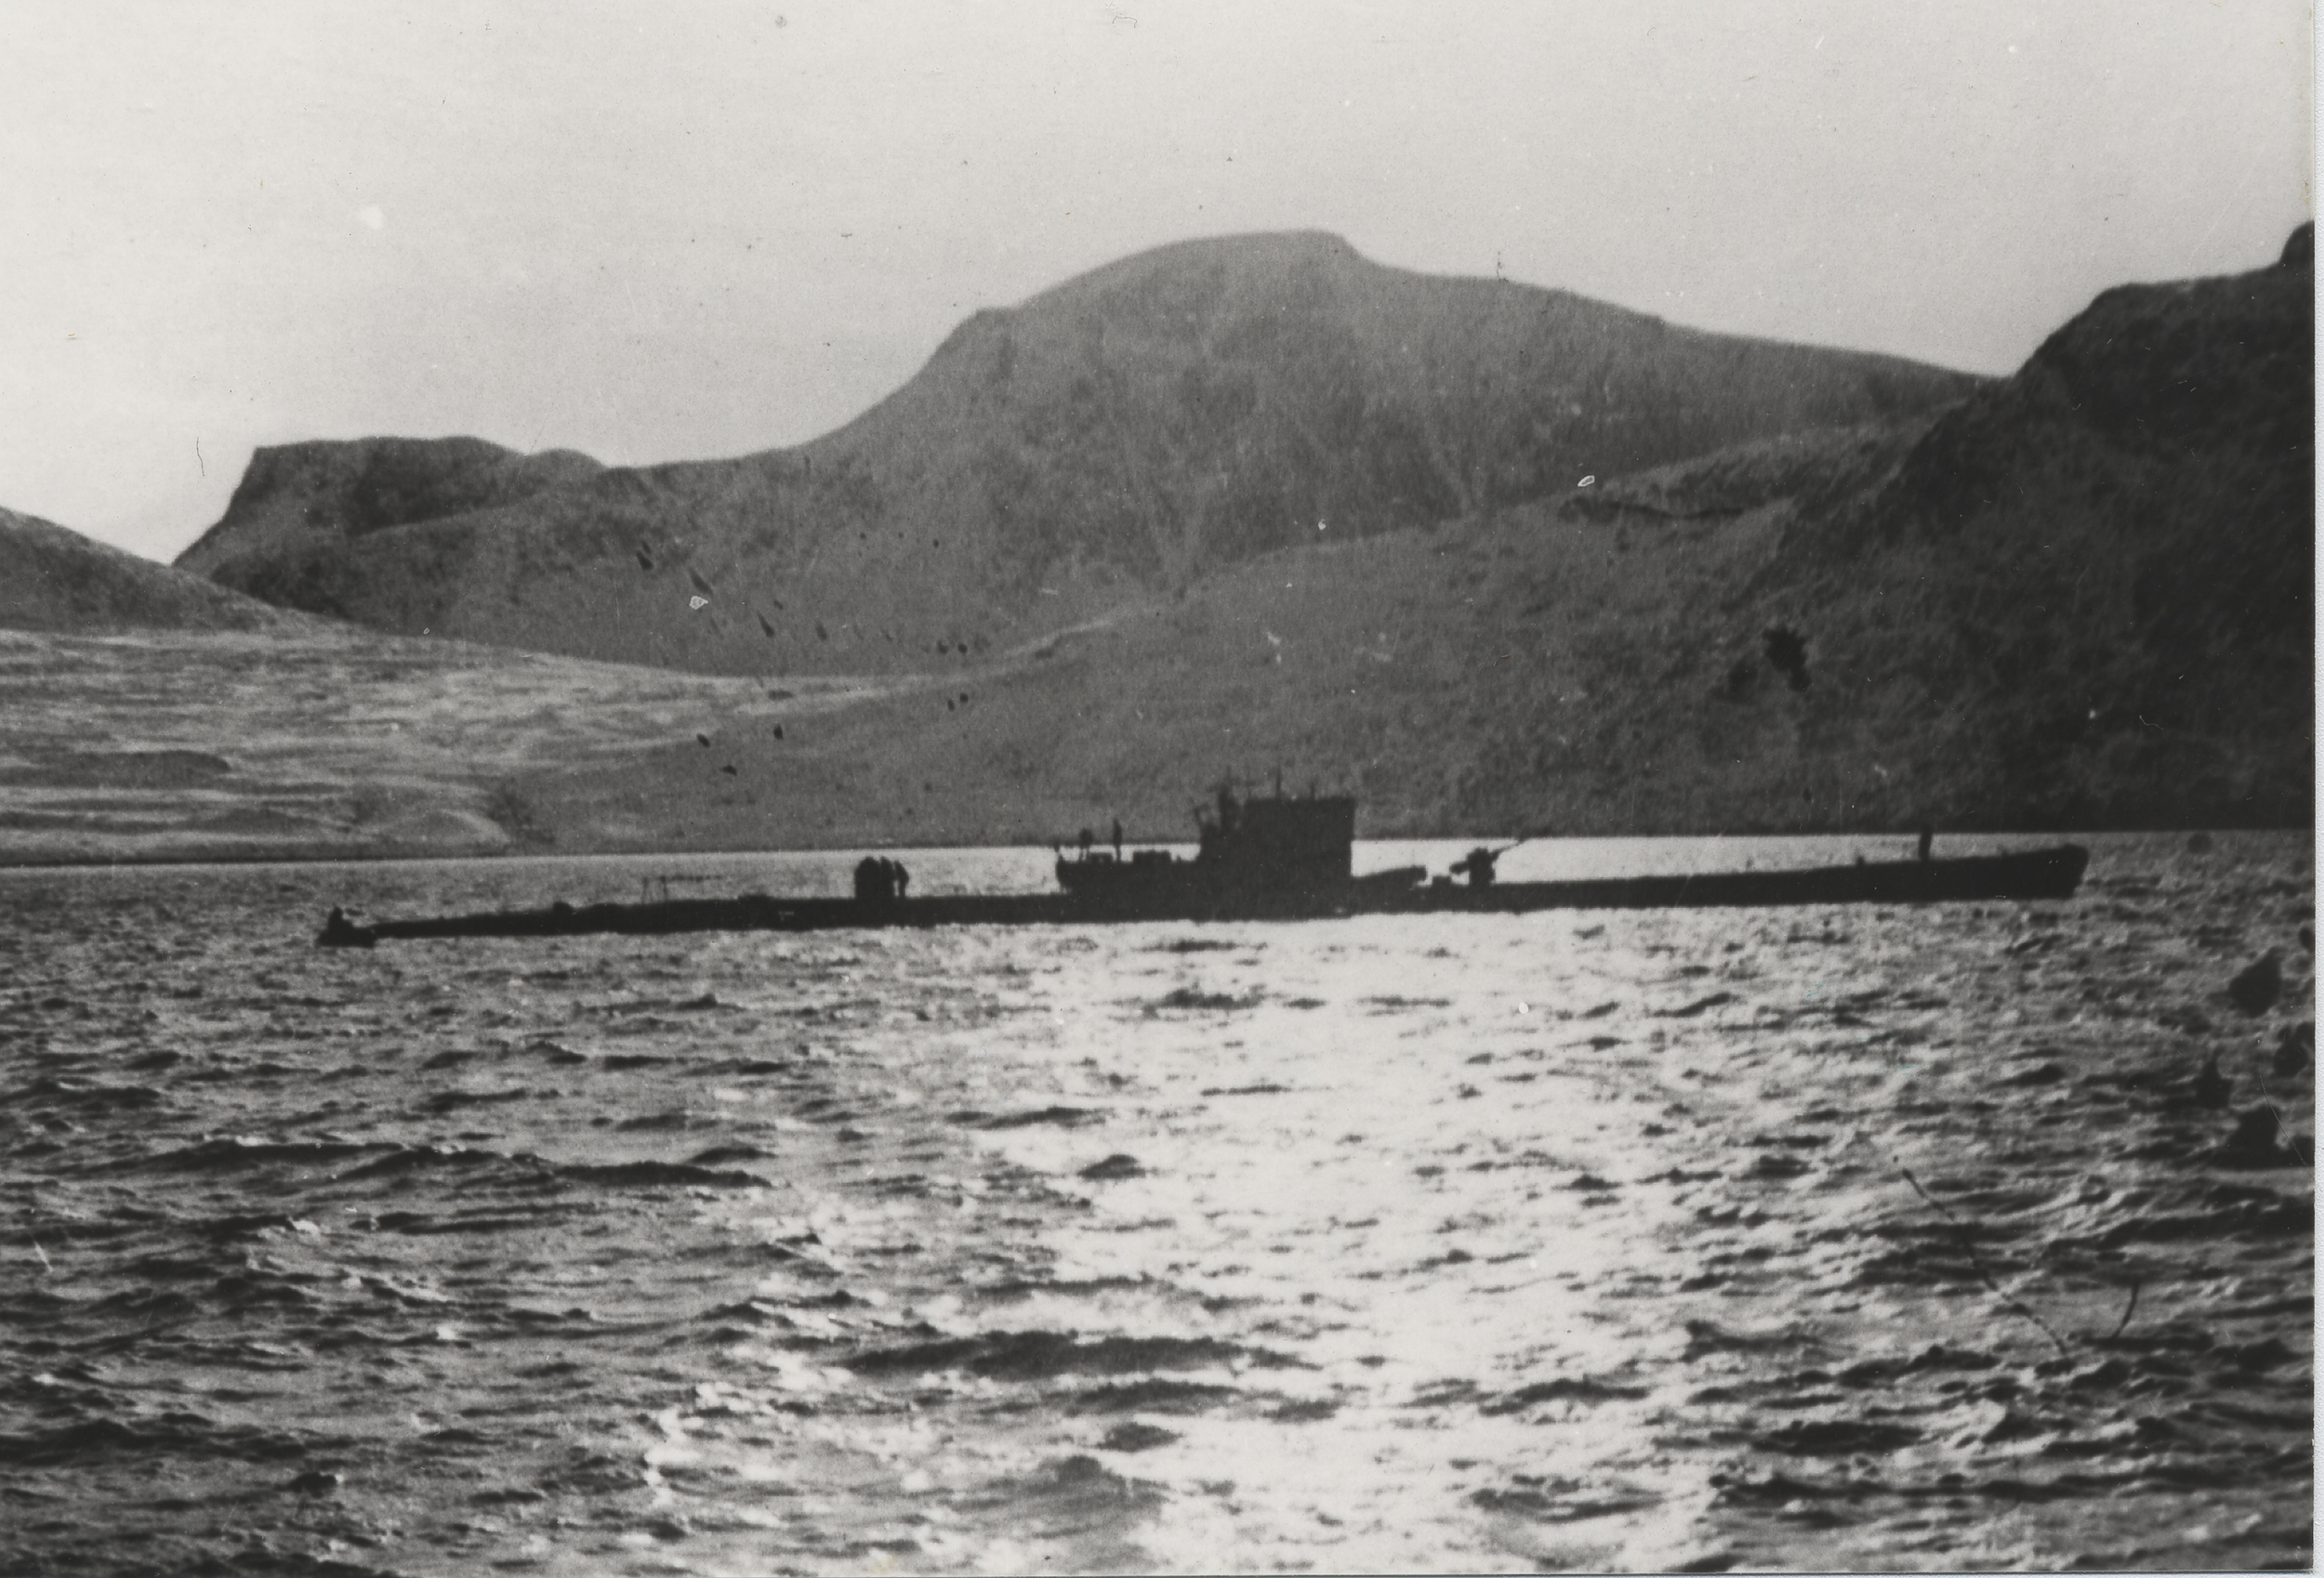 Type IXC/40 submarine U-537 at anchor in Martin Bay, Labrador, Dominion of Newfoundland (now Canada) on 22 Oct 1943. Crewmen can be seen on deck offloading components of Weather Station Kurt into rubber rafts.